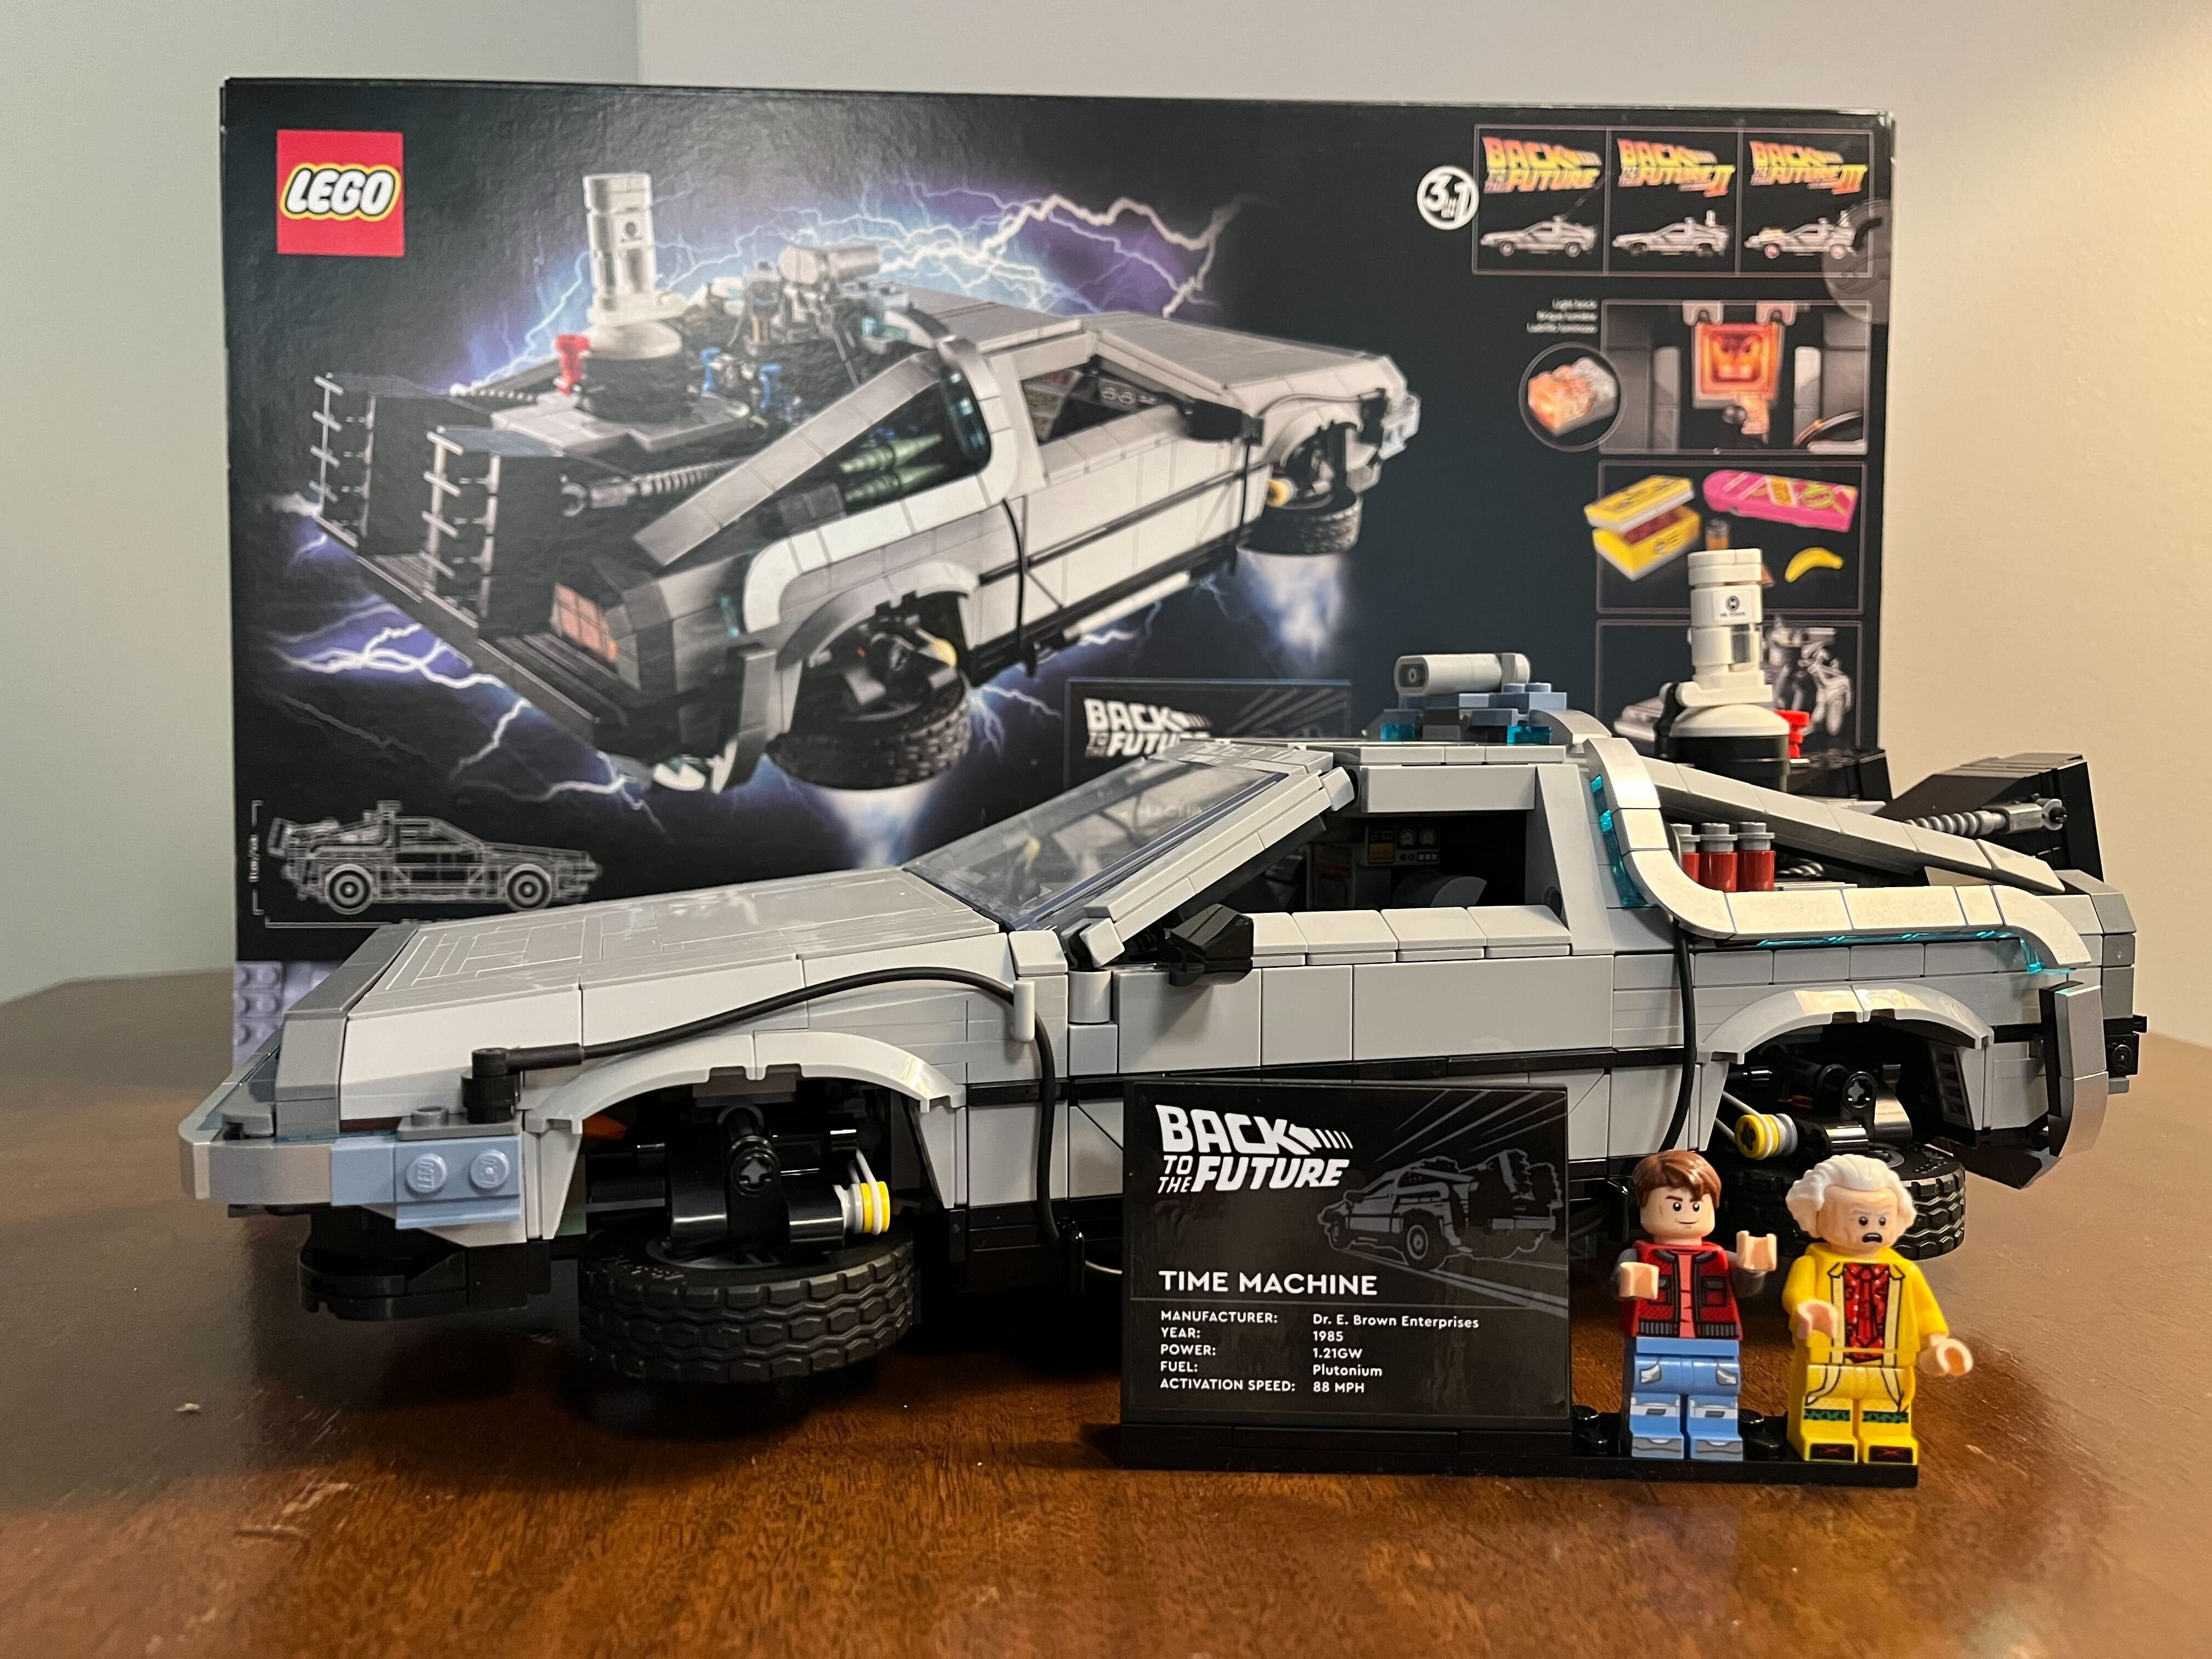 DeLorean Time Machine from Back to the Future in Speed Champions